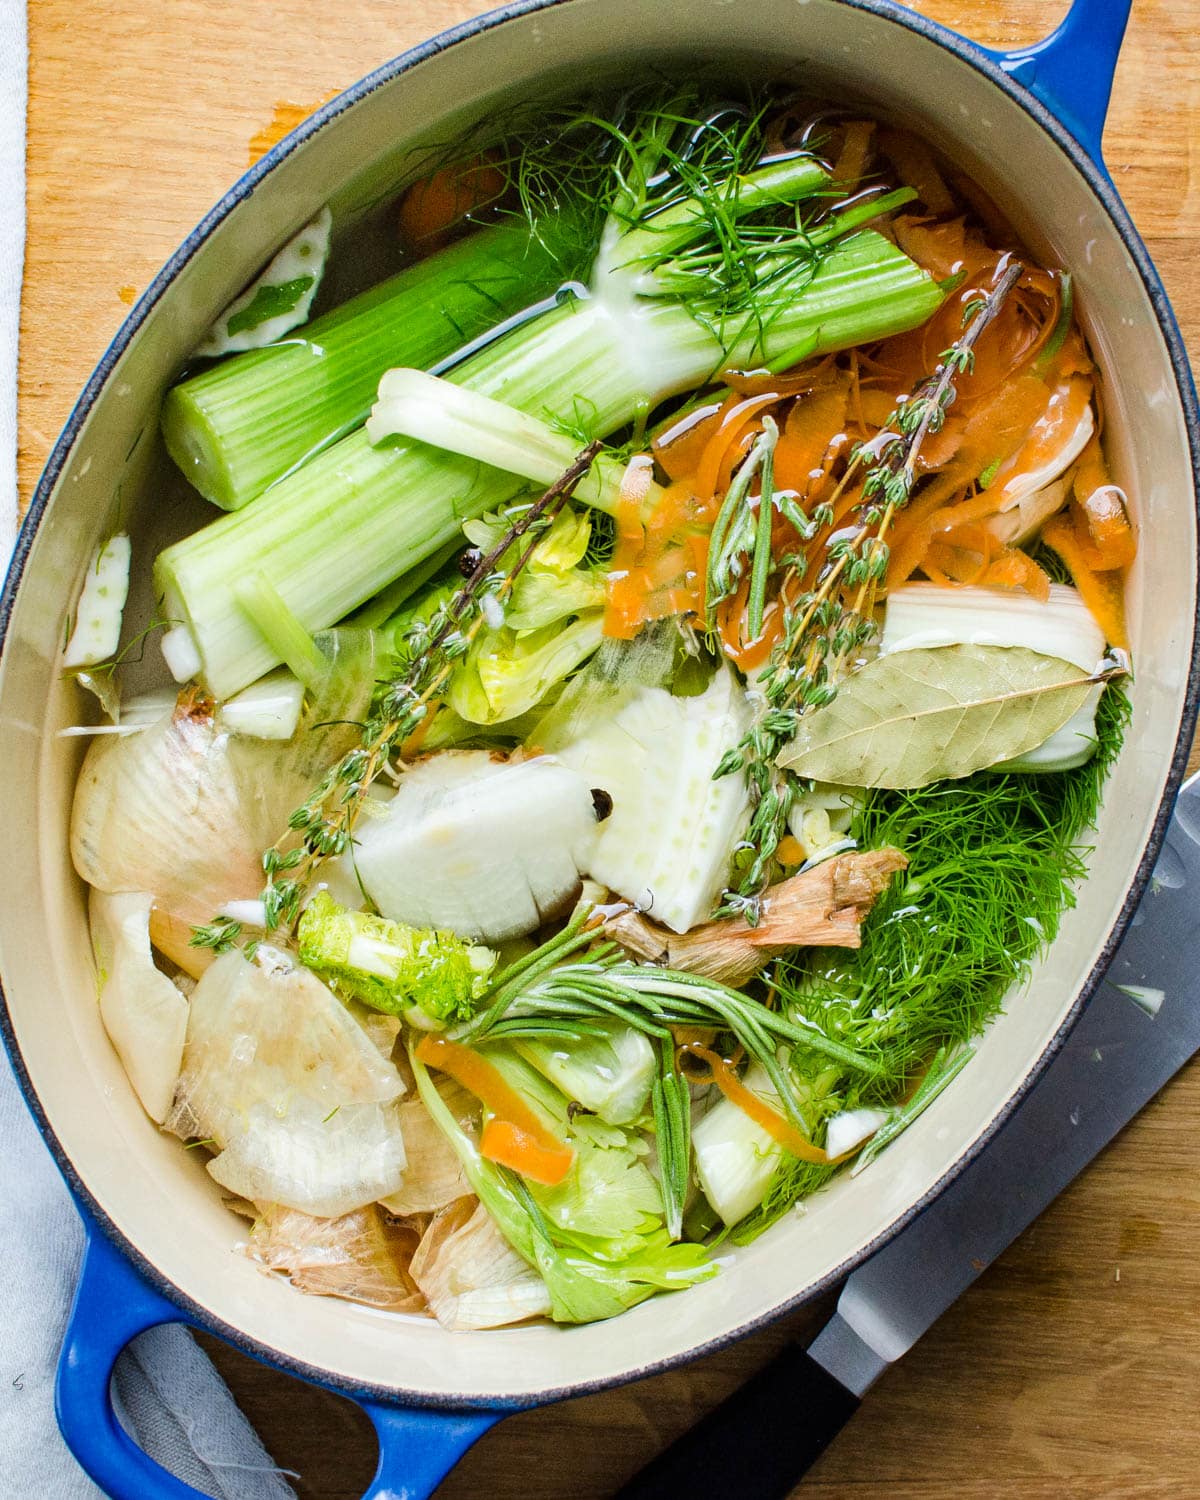 A pot is full of vegetable scraps, aromatics and fresh water.